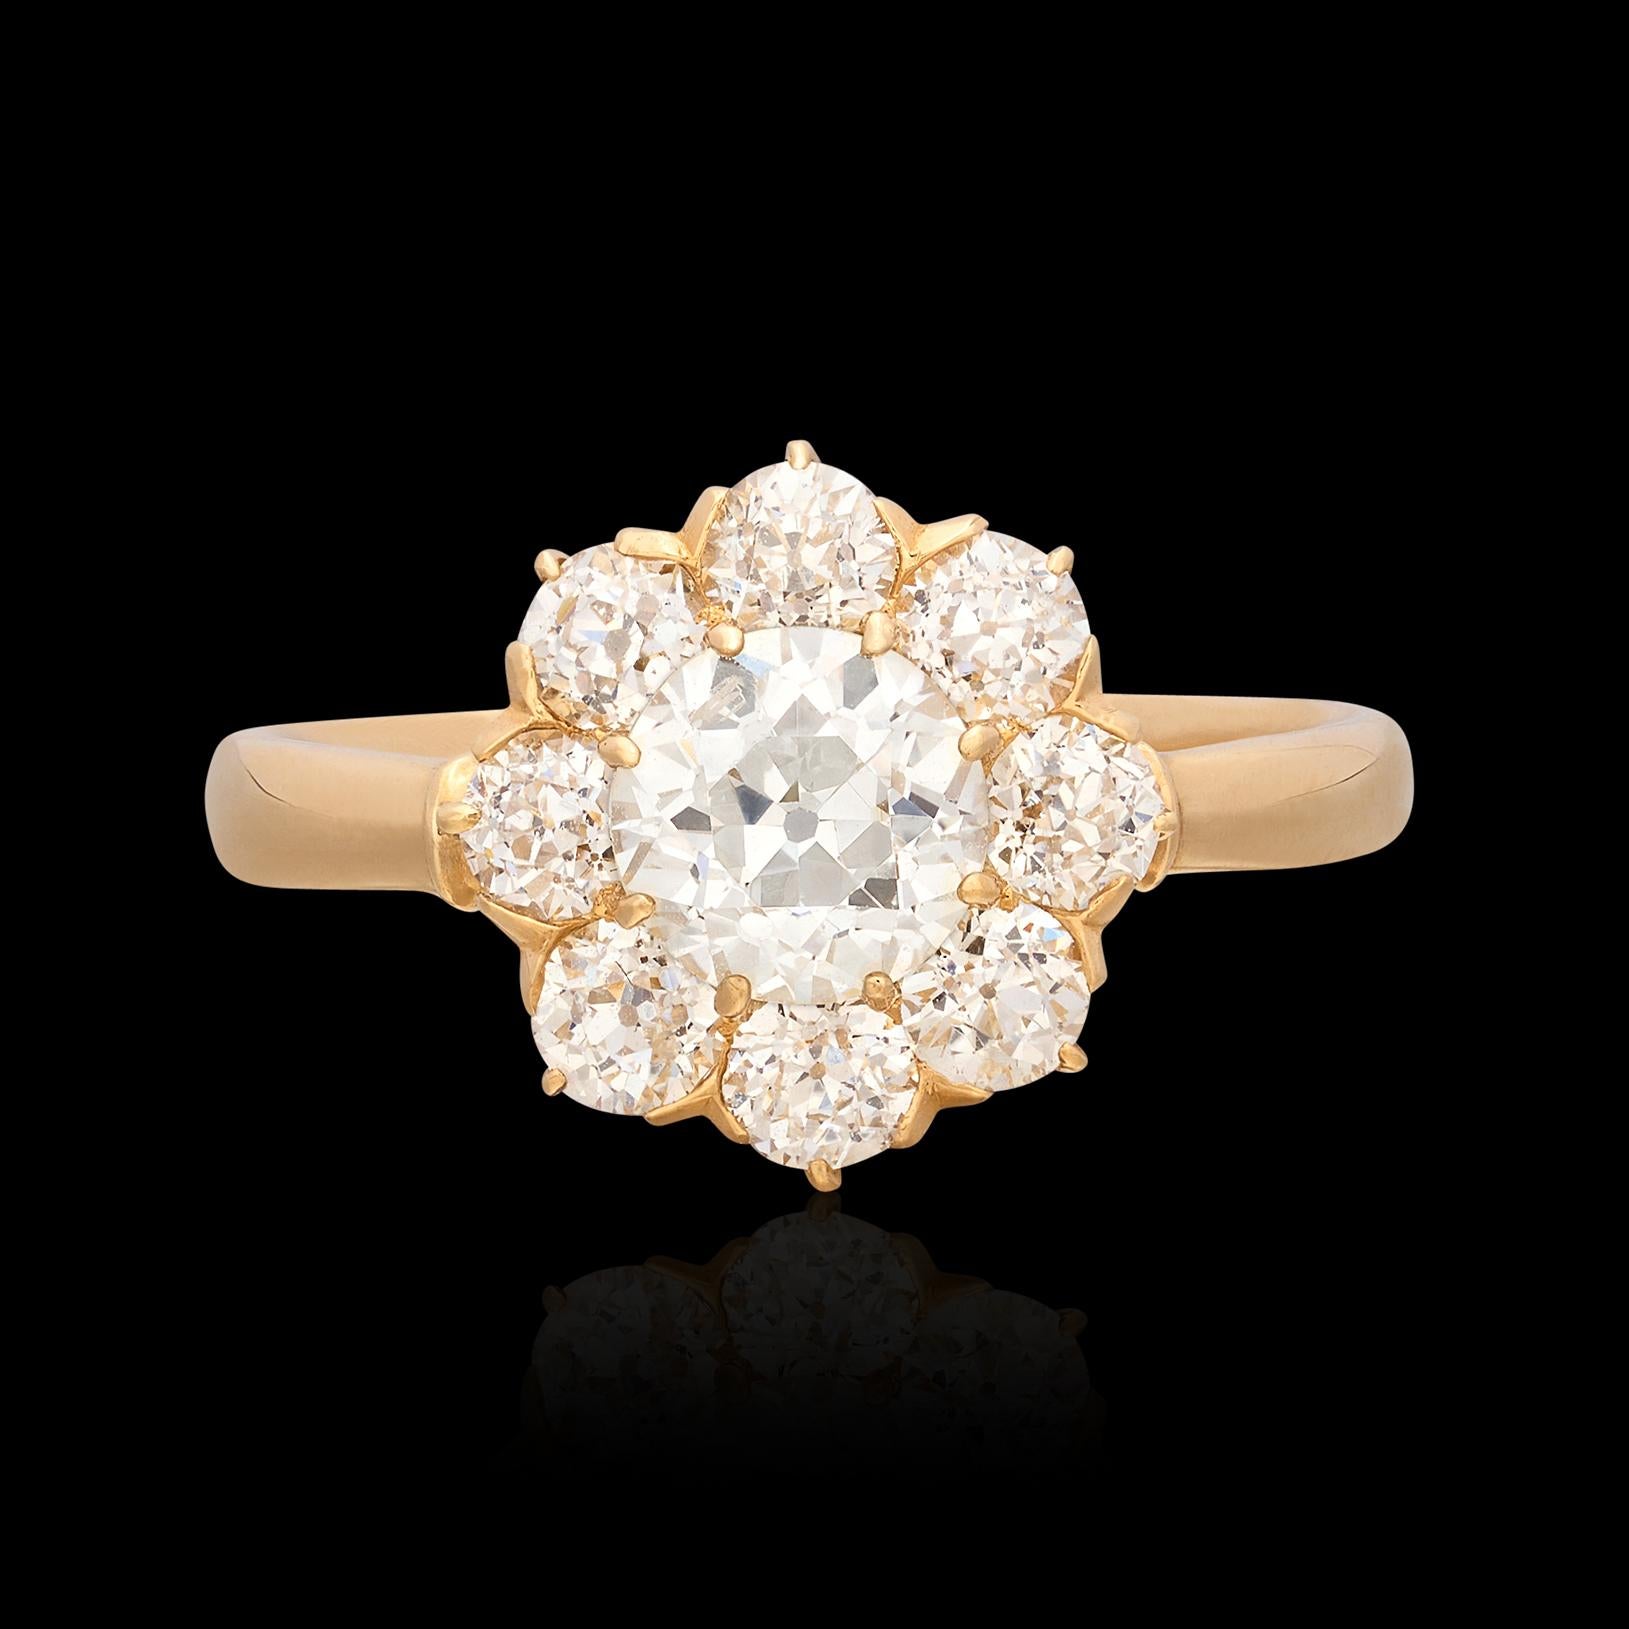 18k Gold Antique Old European Cut Diamond Ring In Excellent Condition For Sale In San Francisco, CA